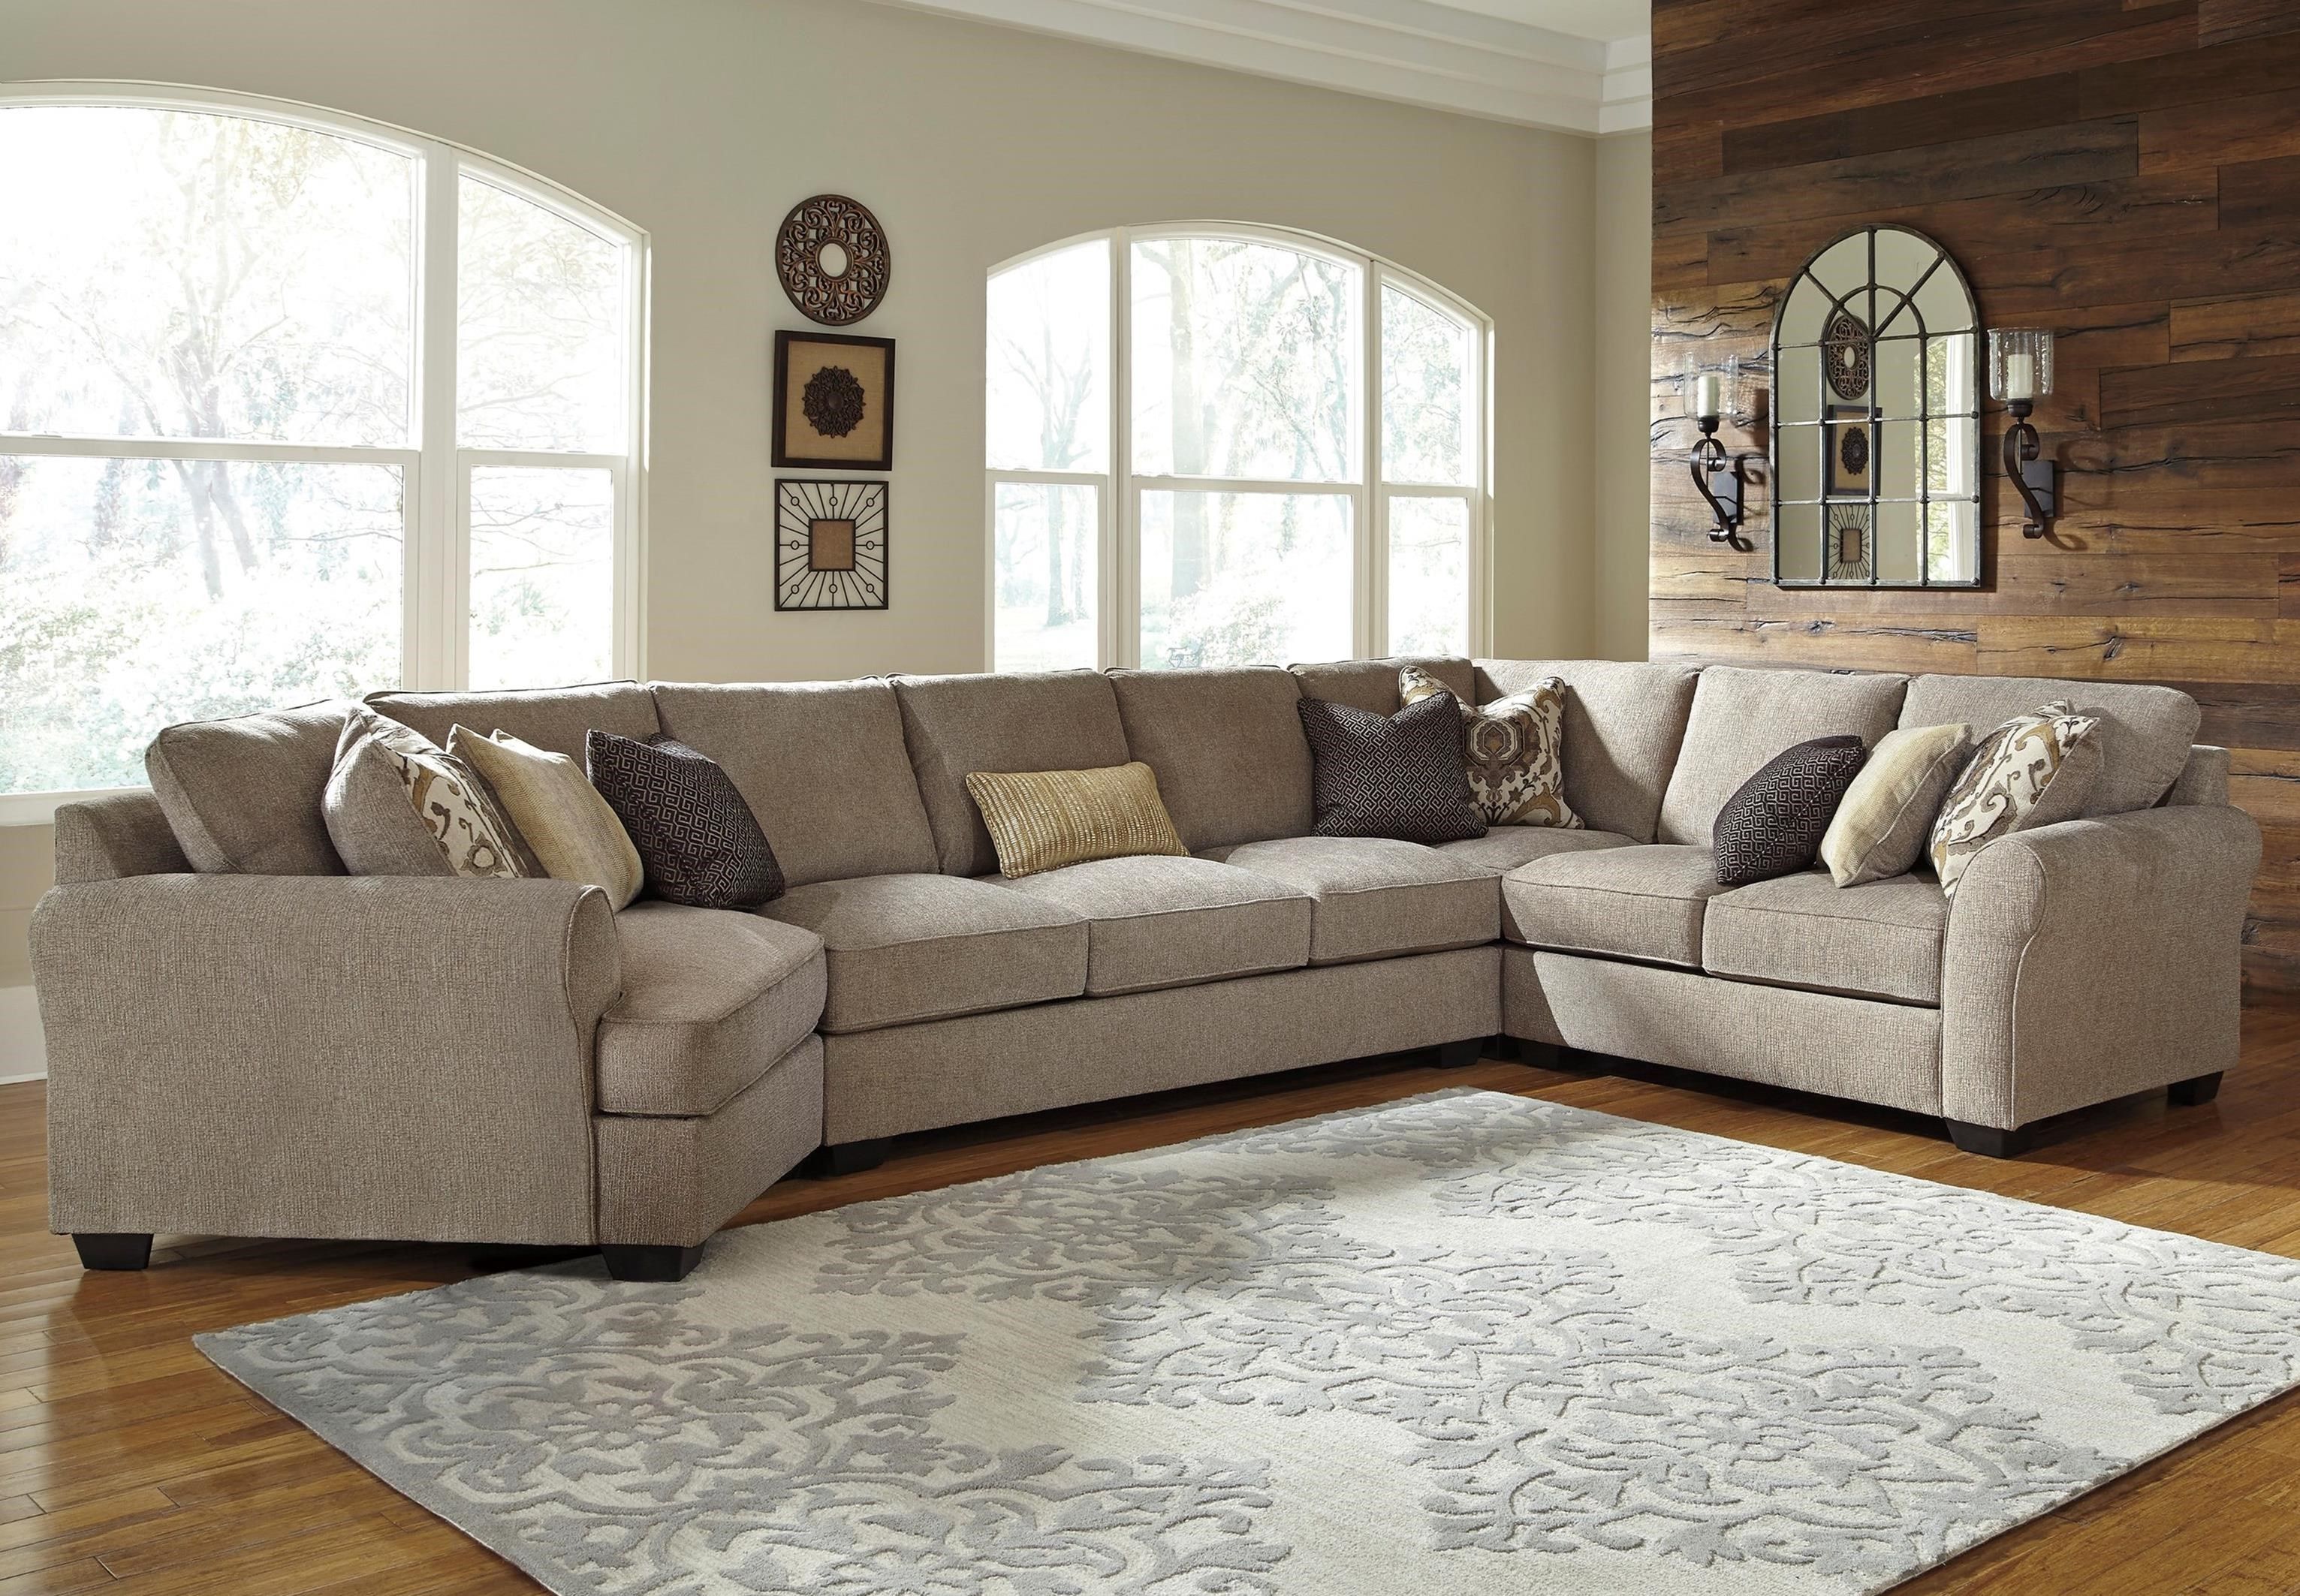 Benchcraft Pantomine 4 Piece Sectional With Left Cuddler Armless Inside Cuddler Sectional Sofa (View 10 of 12)